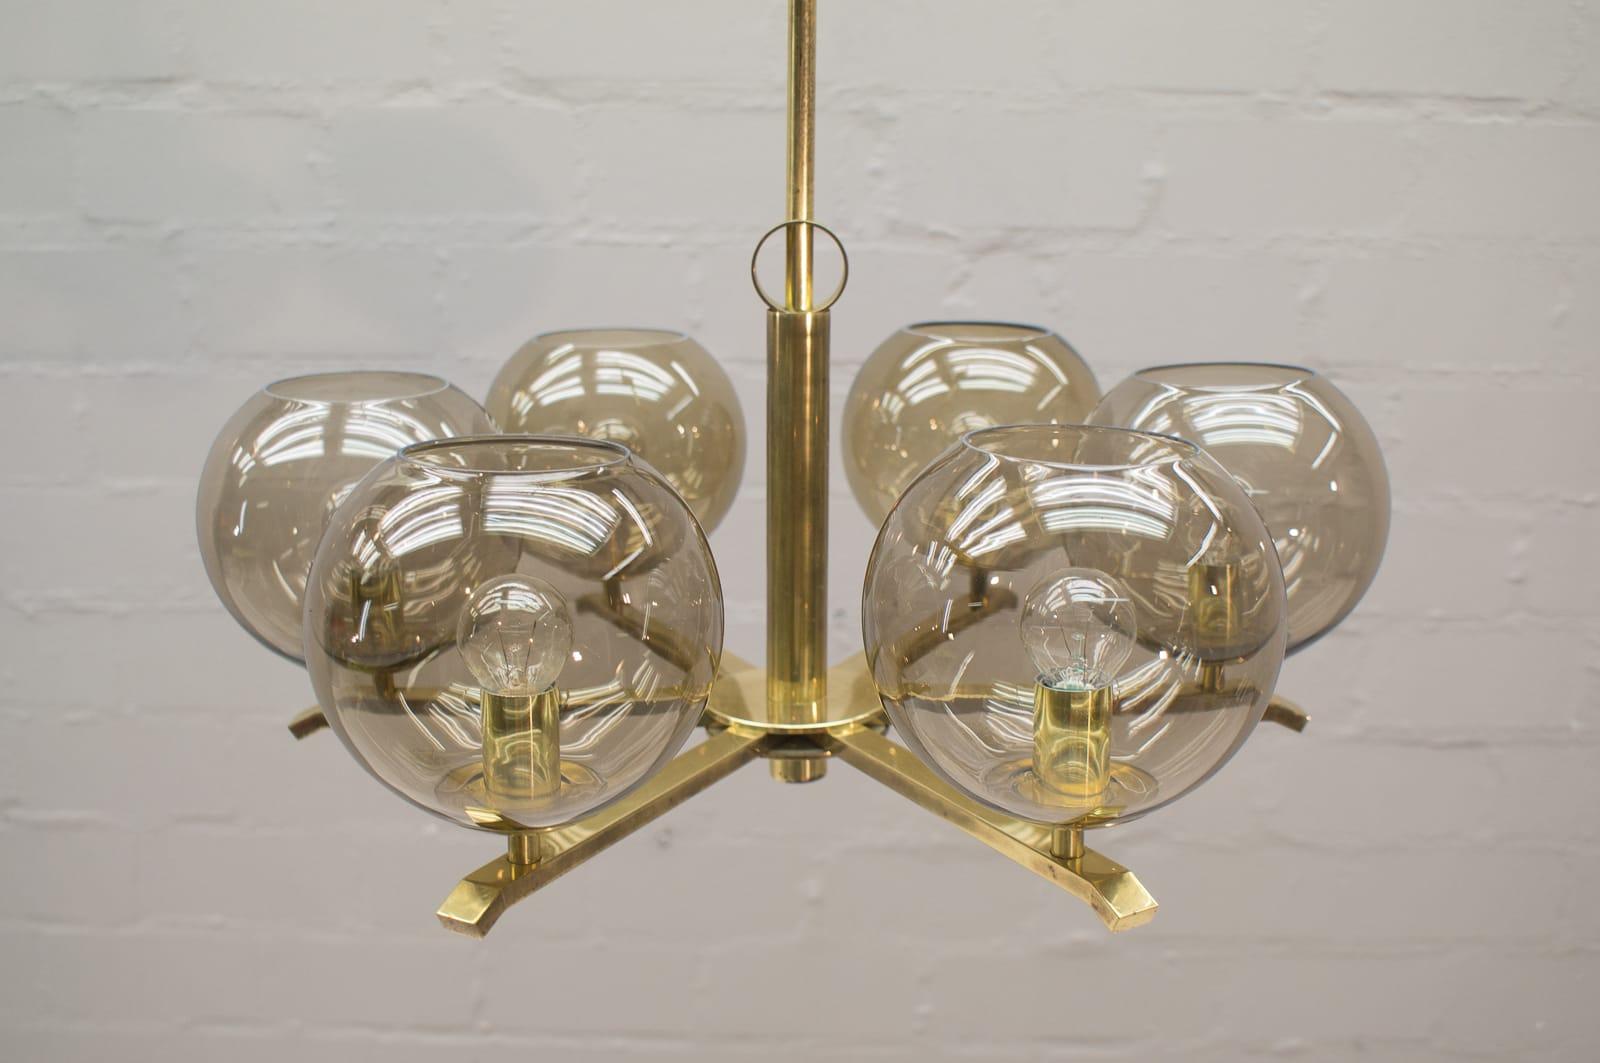 Elegant 1960s Brass Ceiling Lamp with 8 Smoked Glass Globes, Germany For Sale 2